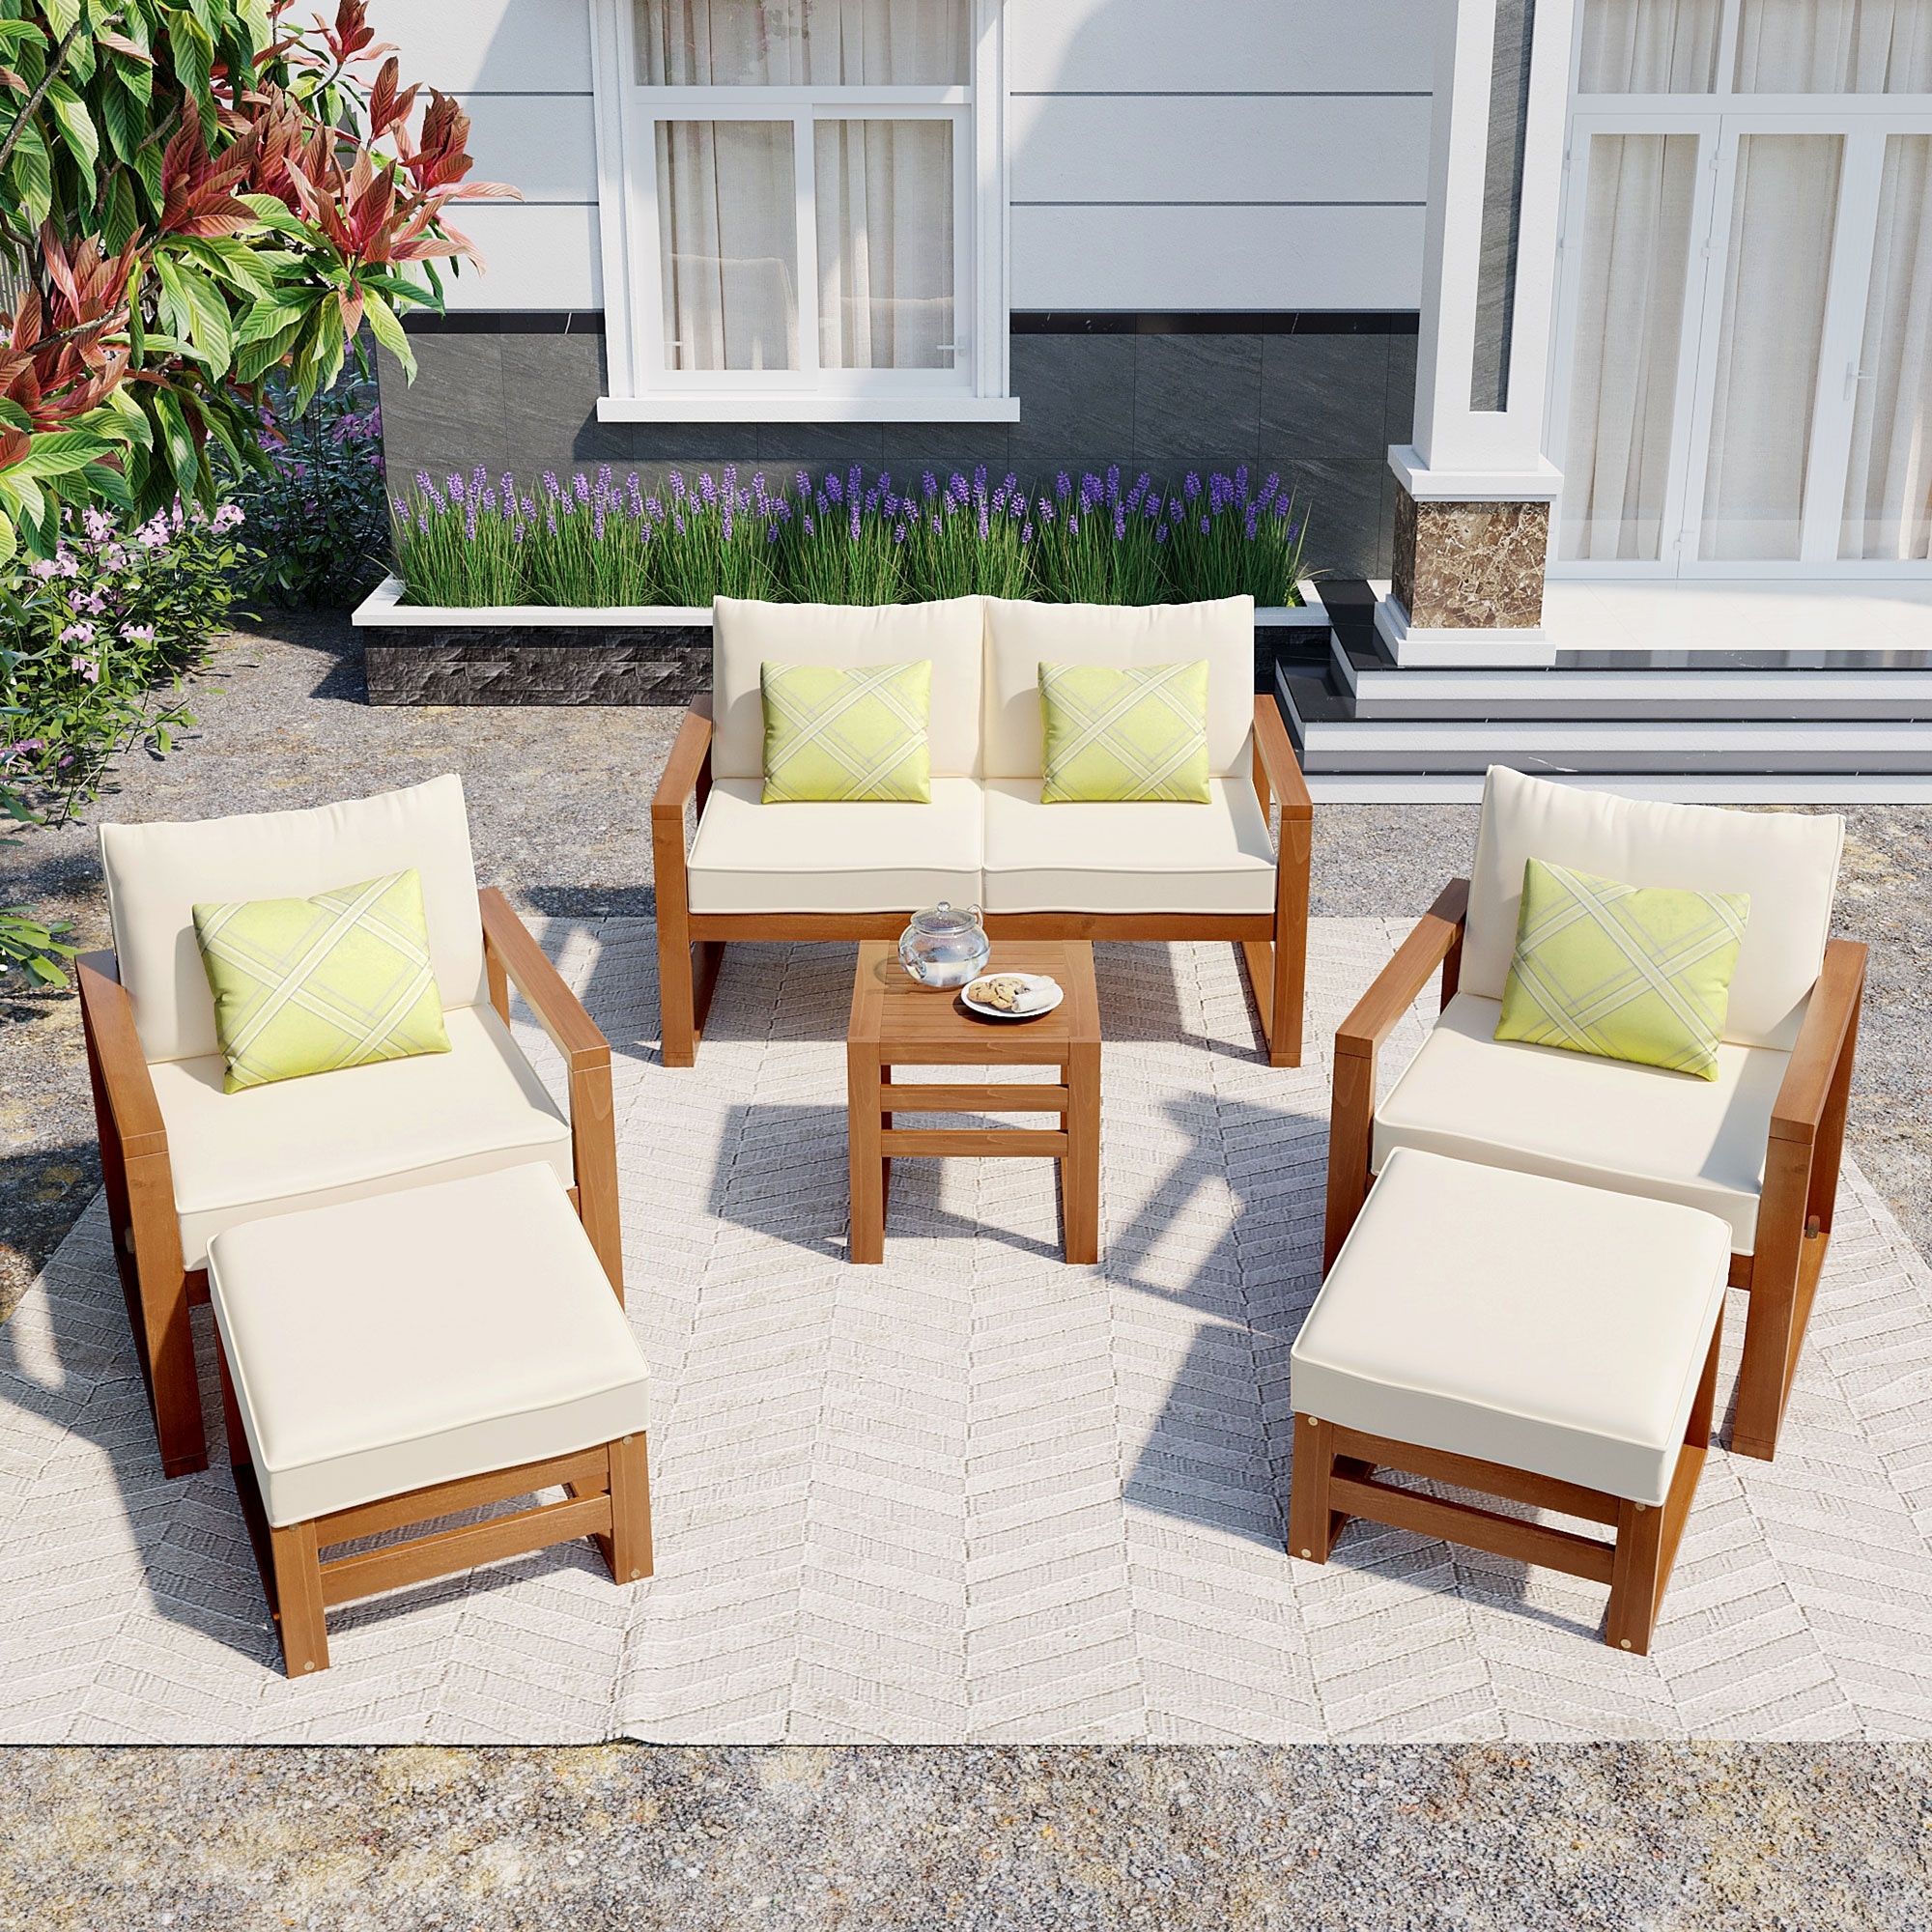 6-piece Patio Seating Group Outdoor Patio Conversation Set  Sectional Garden Chat Set With Ottomans And Cushions